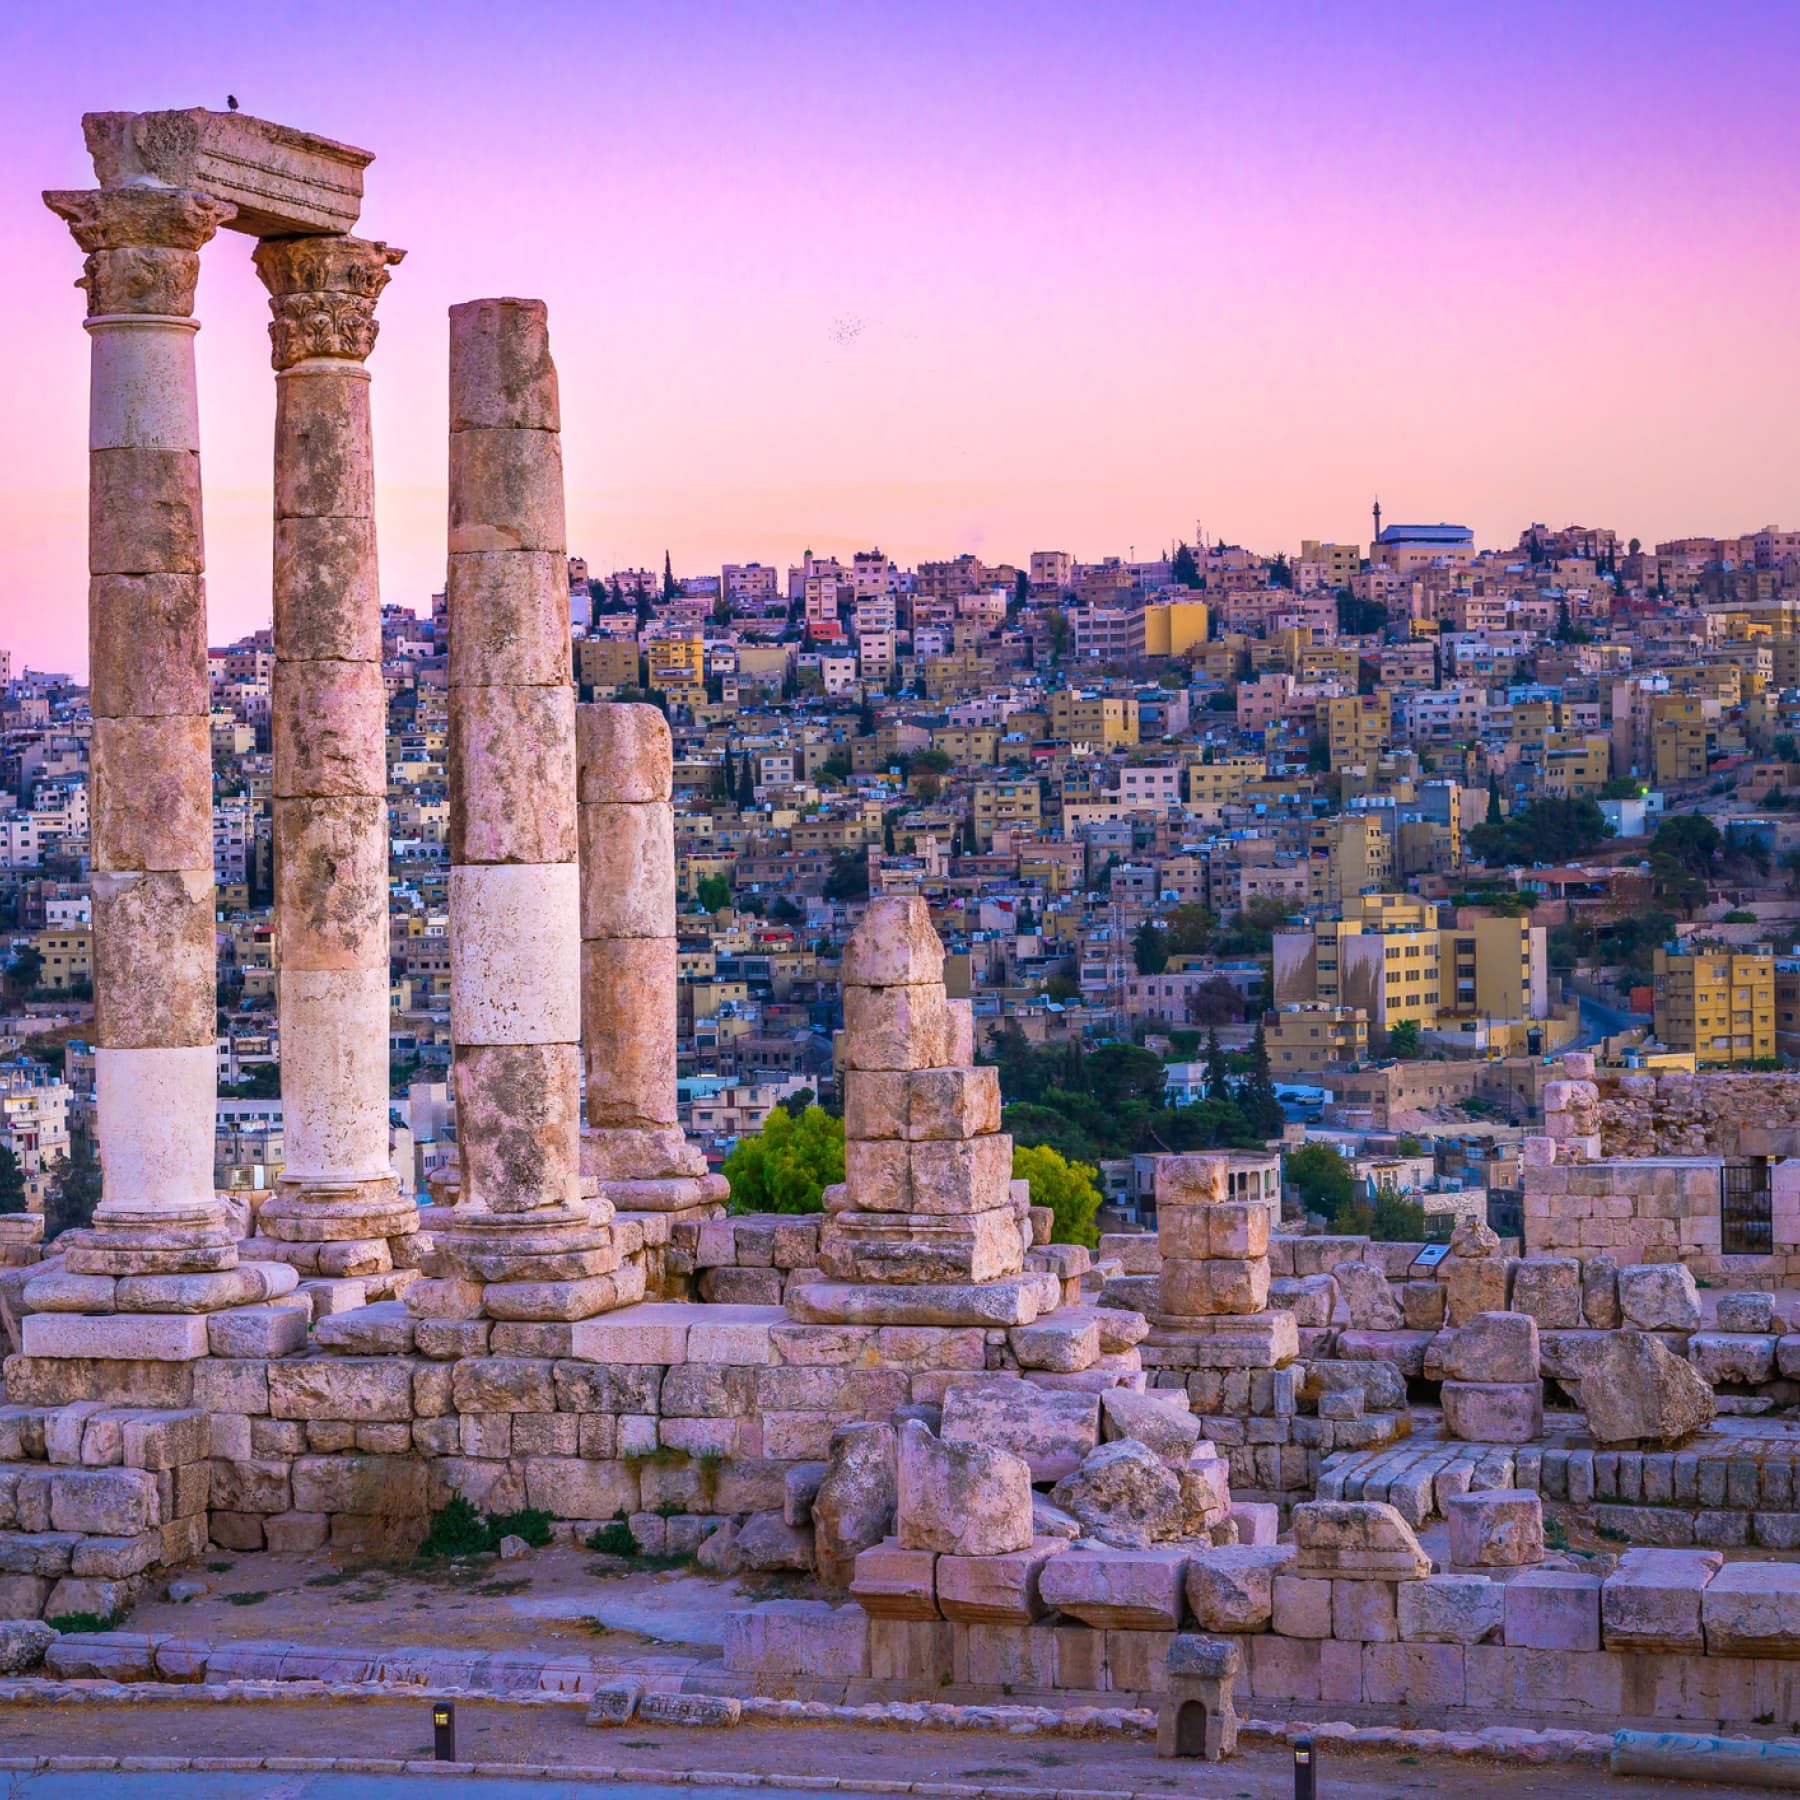 Jordan is one of the best places to visit in 2023